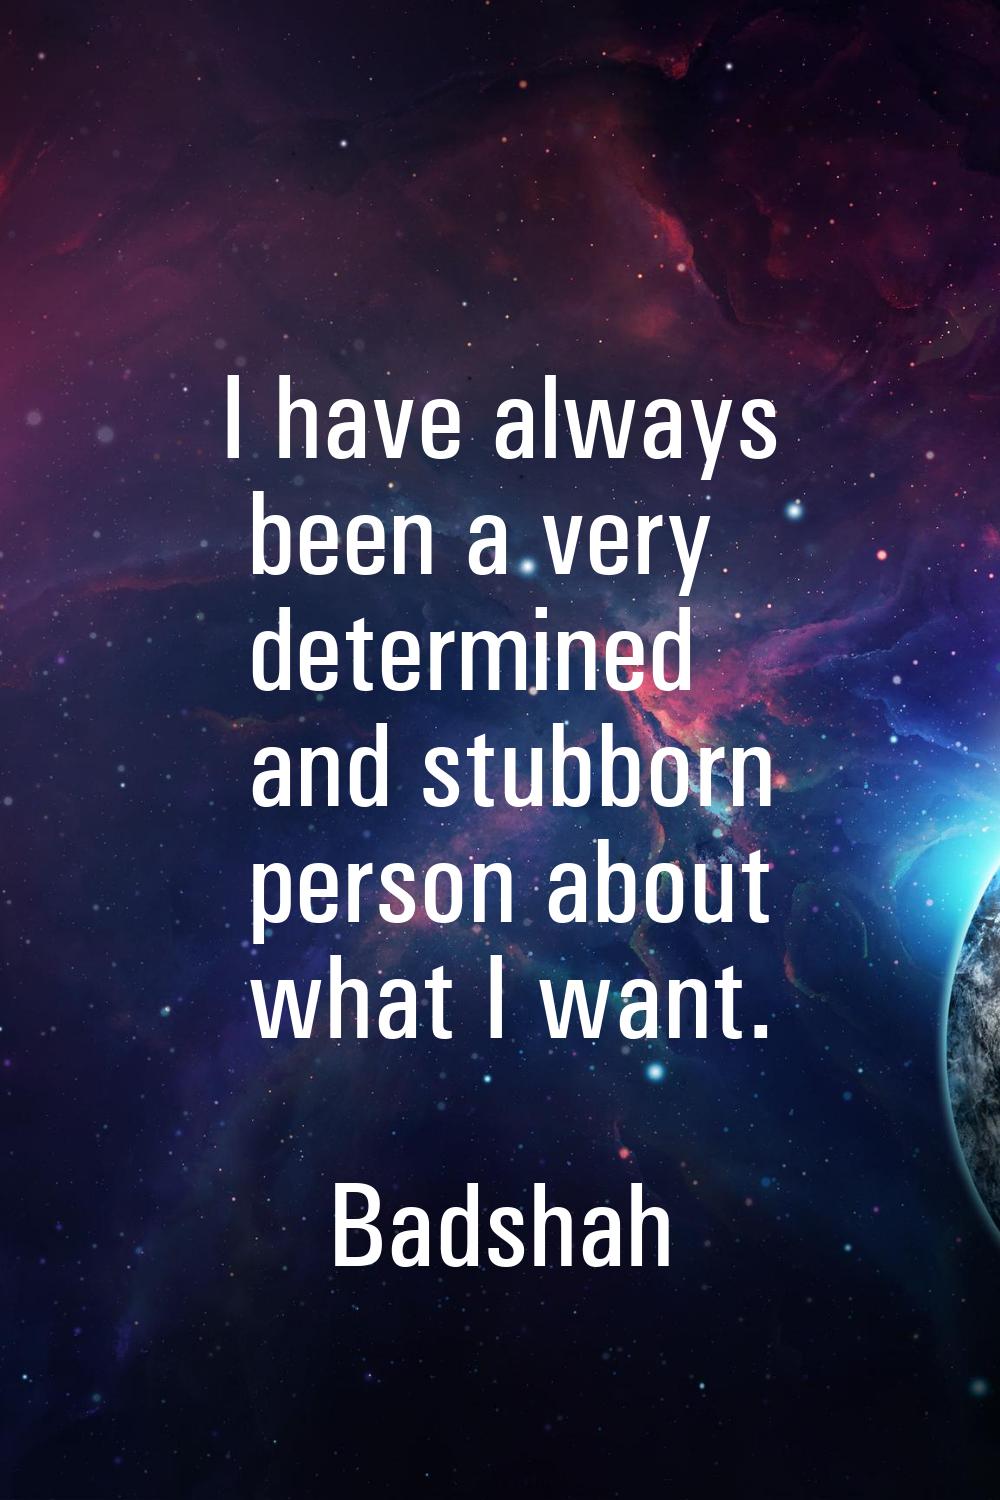 I have always been a very determined and stubborn person about what I want.